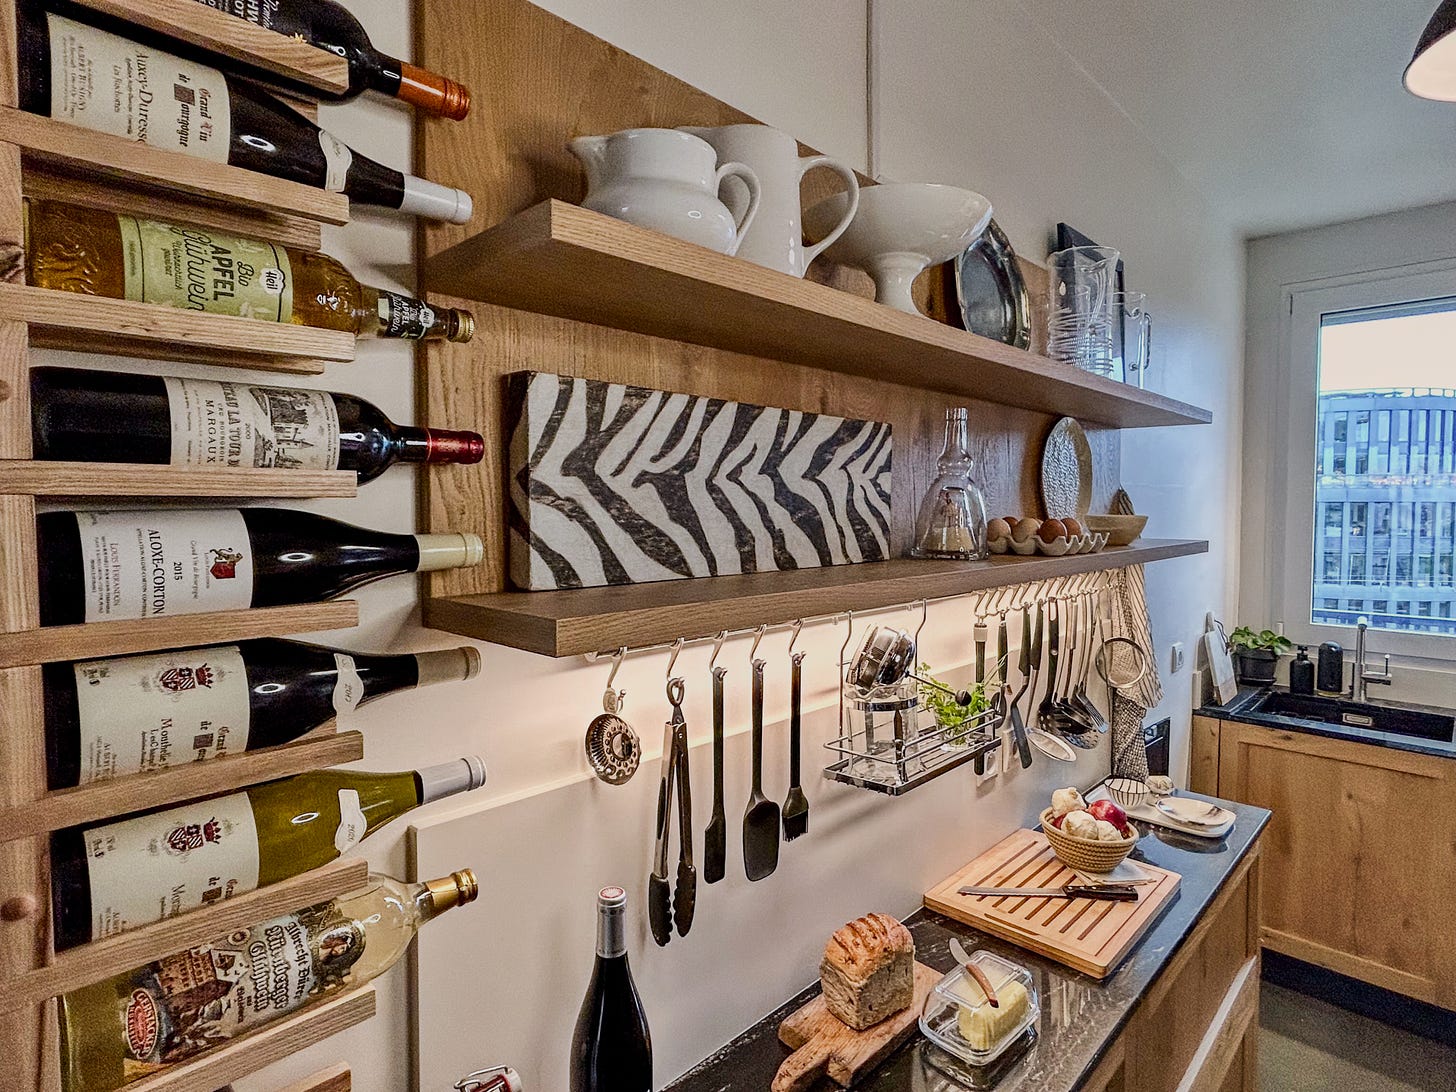 A small Paris kitchen wall with wine bottles, cooking utensils and decor